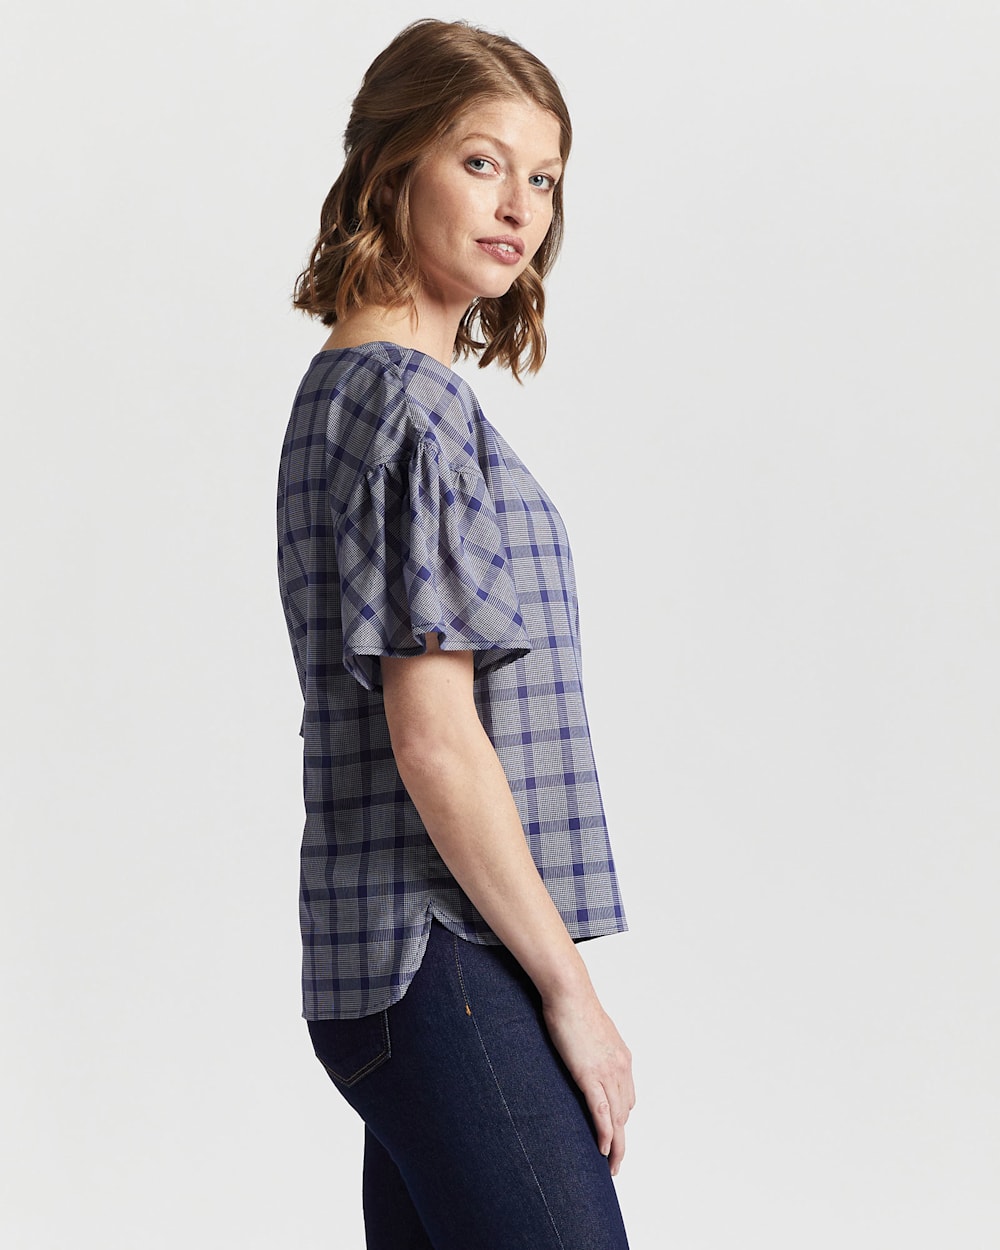 ALTERNATE VIEW OF WOMEN'S AIRY SHORT-SLEEVE BOATNECK TOP IN NAVY/WHITE PLAID image number 2